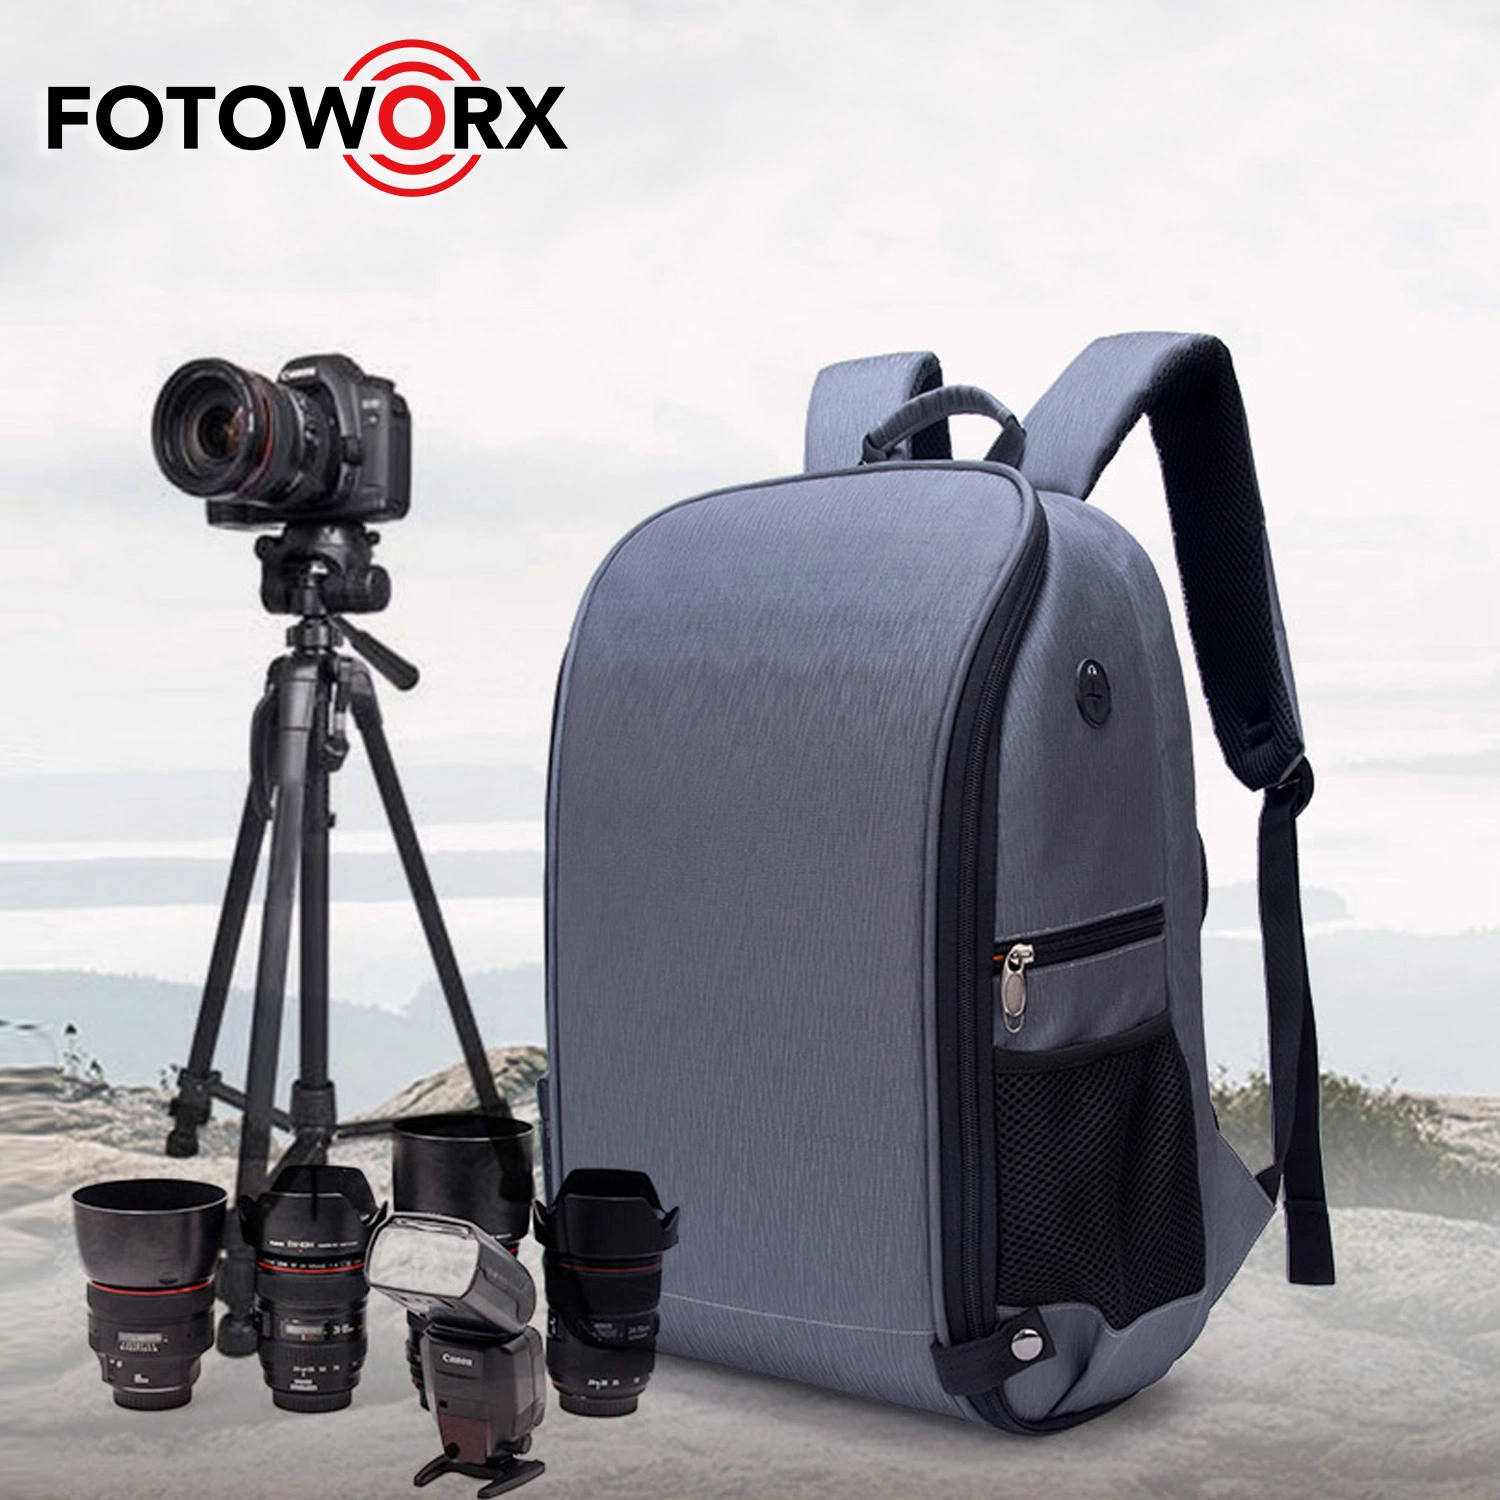 Camera Bags Backpack for DSLR/SLR Camera Lens Tripods Accessories